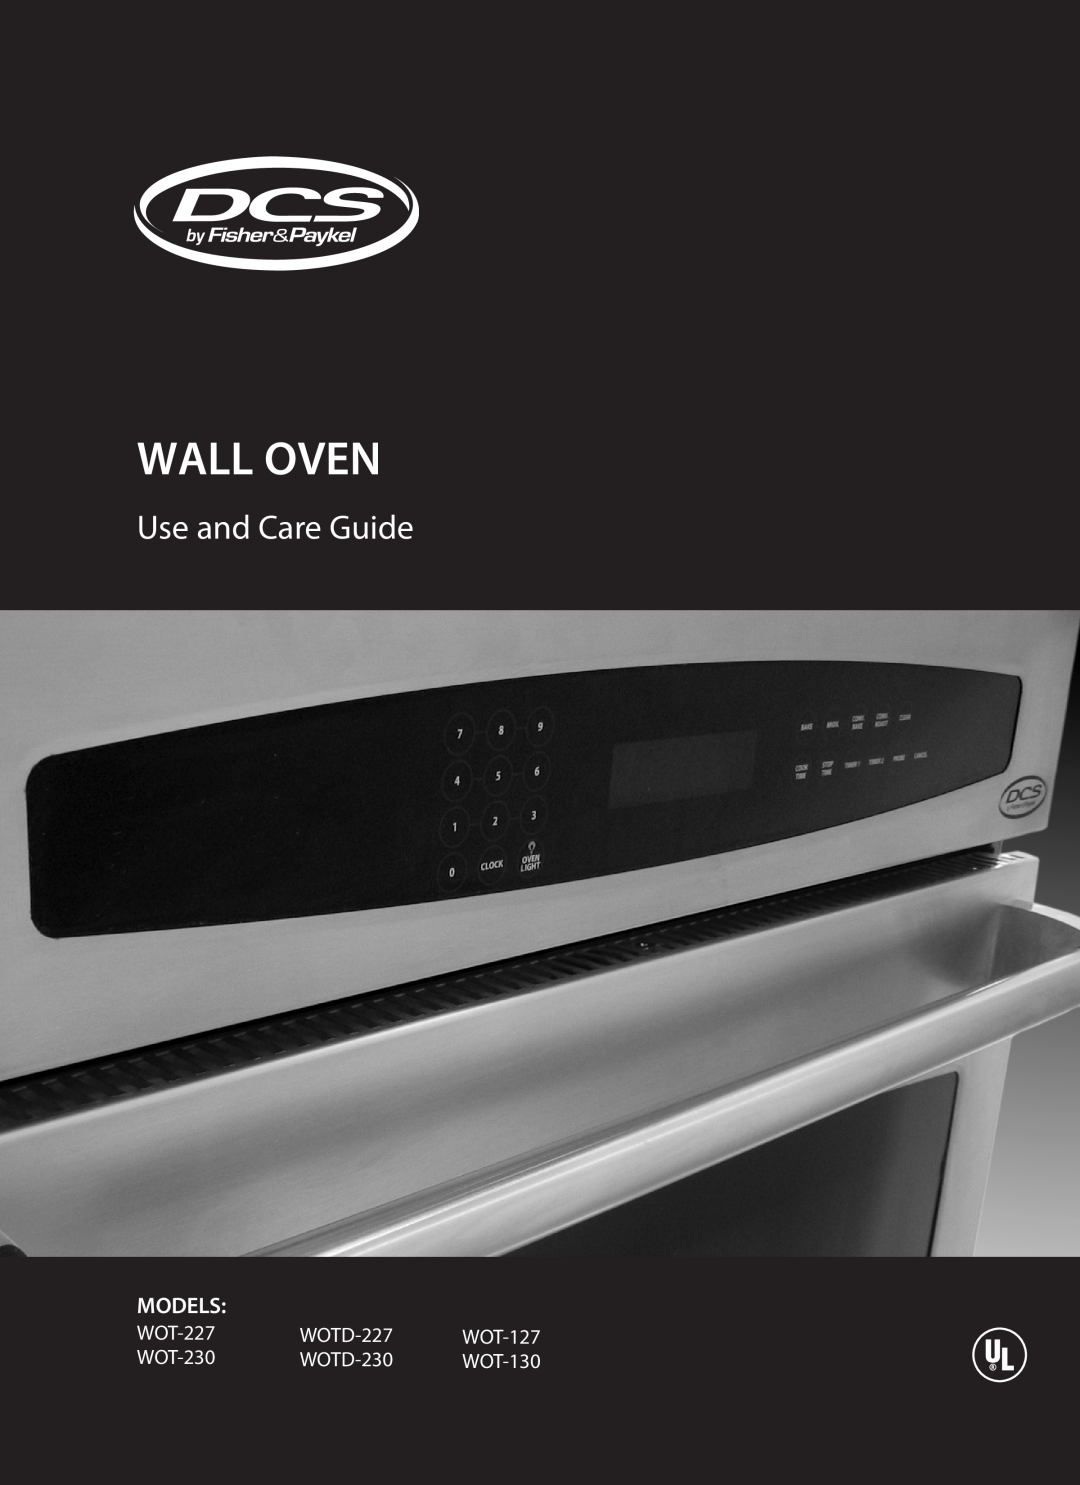 DCS manual Wall Oven, Use and Care Guide, Models, WOT-227 WOTD-227 WOT-127 WOT-230 WOTD-230 WOT-130 